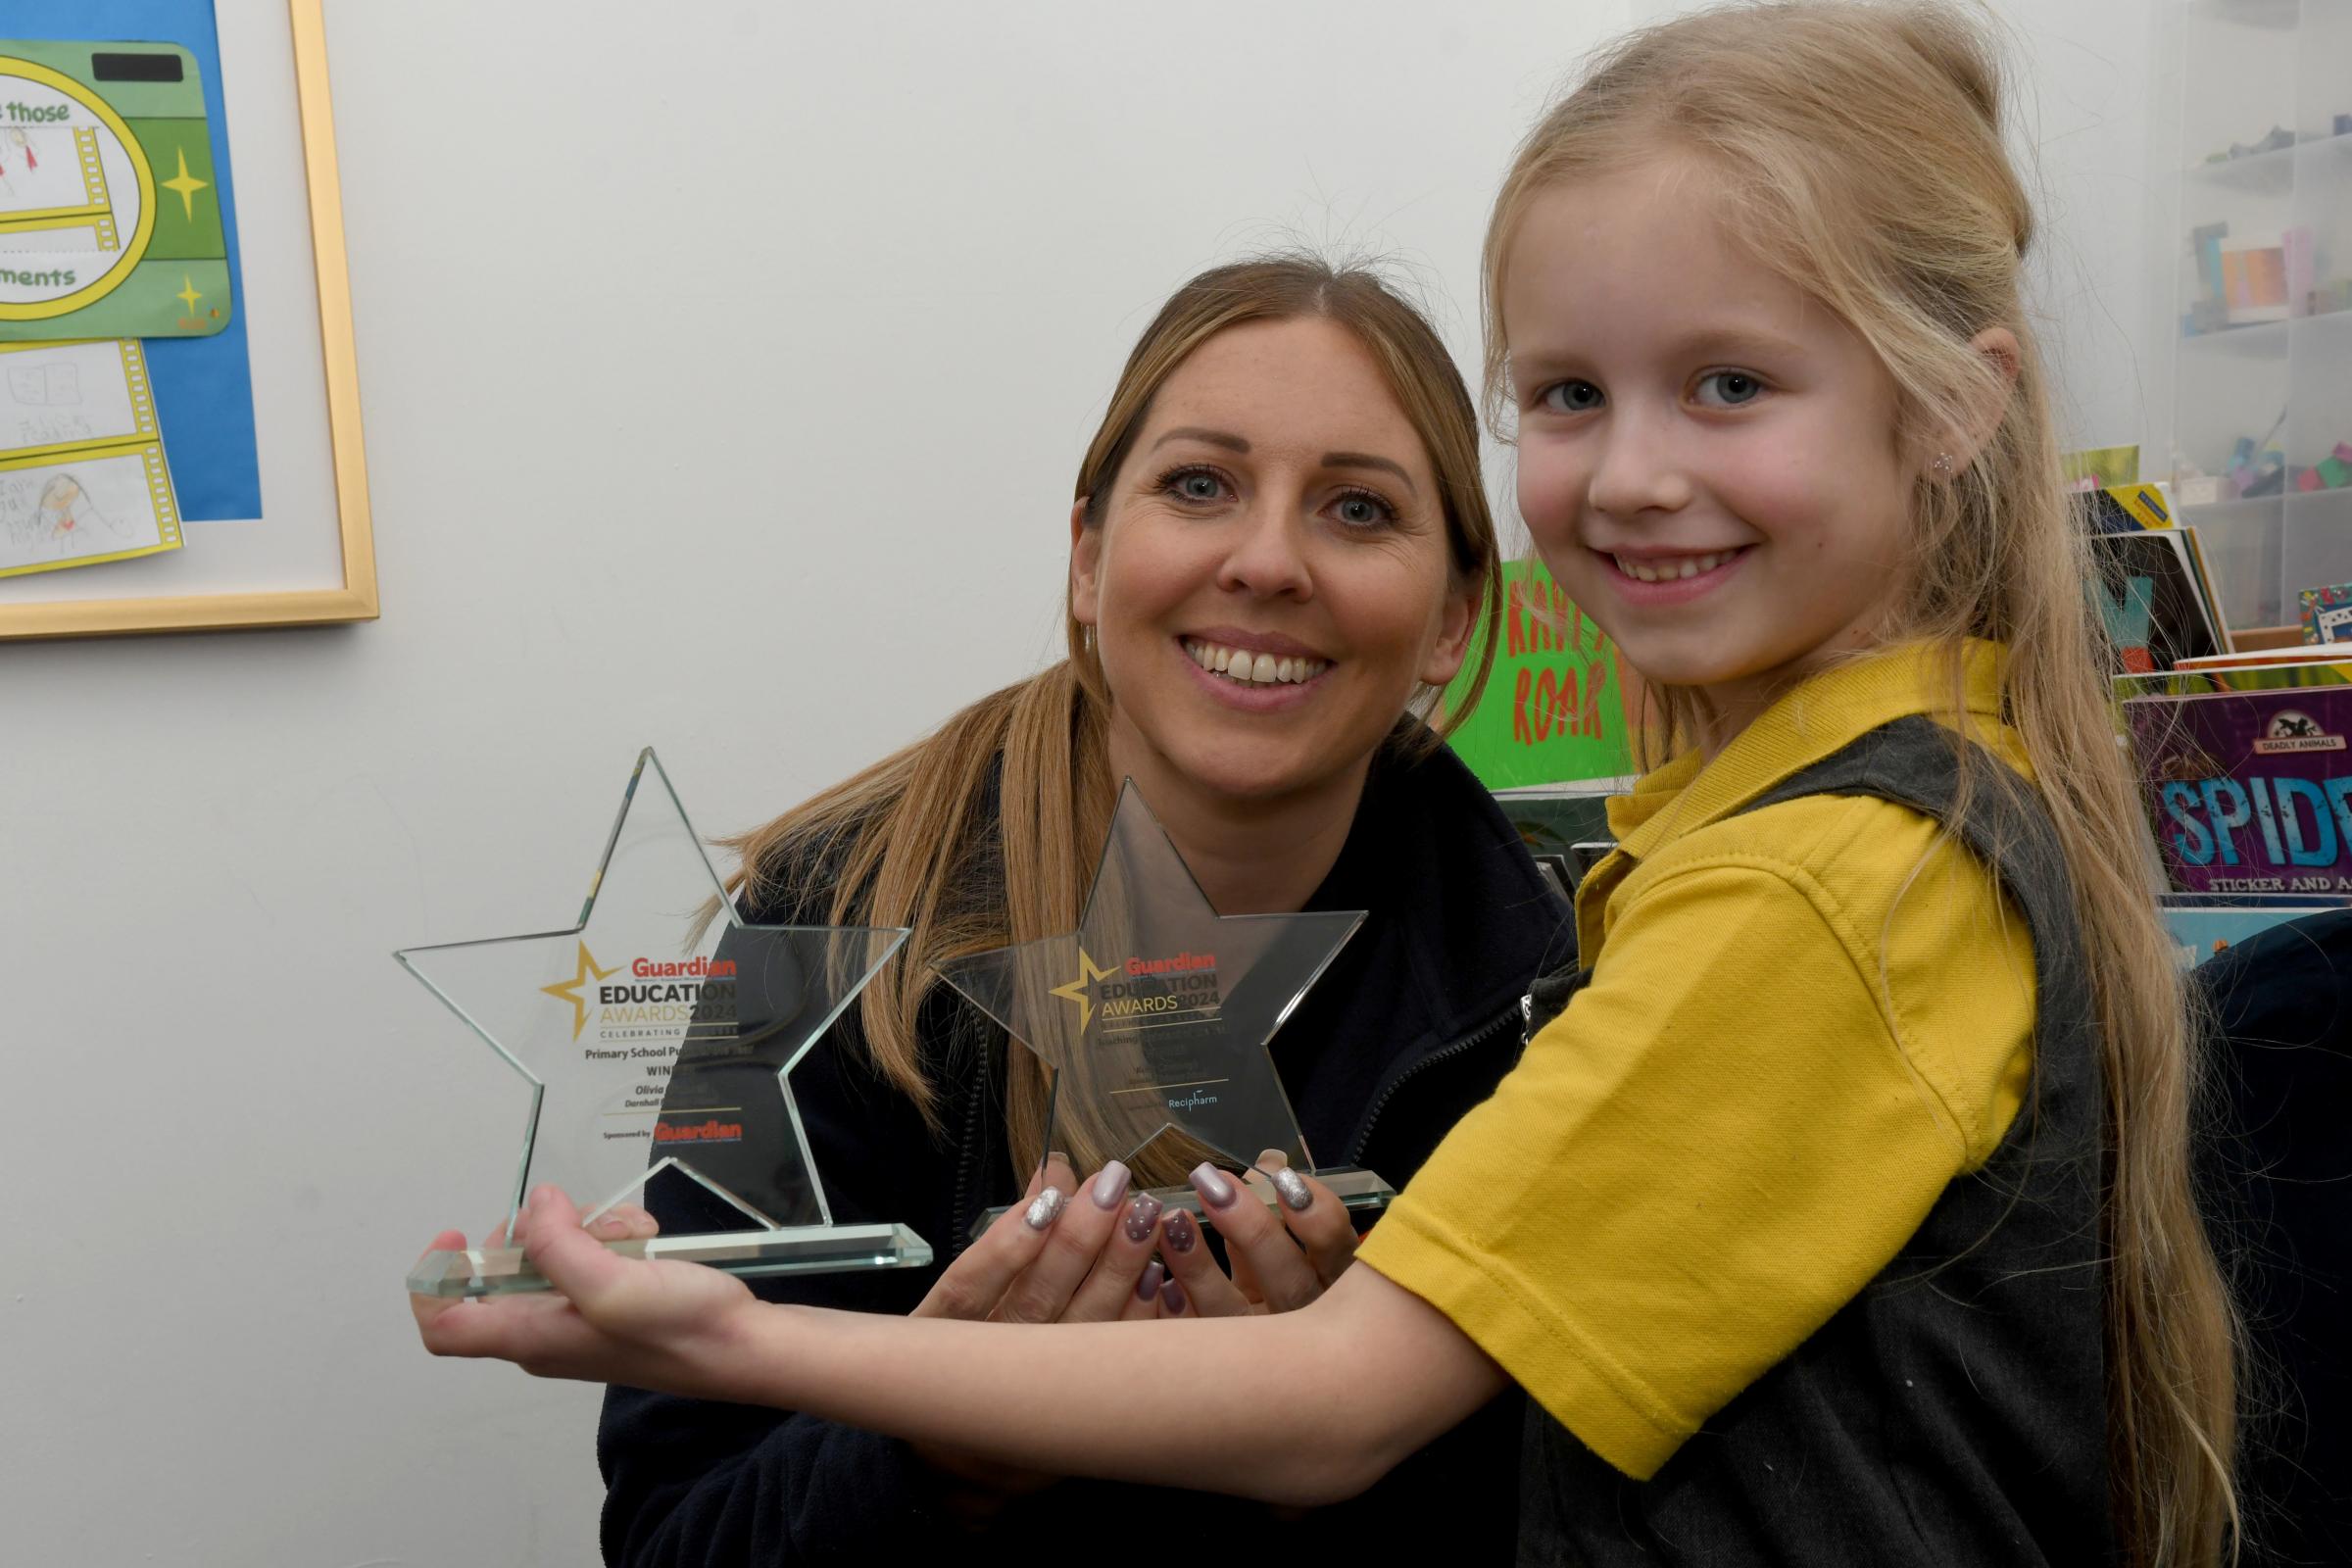 Darnhall Primary School had two winners - Kelly Cavanagh is our Teaching Assistant of the Year and Olivia Grannell is our Primary School Pupil of the Year